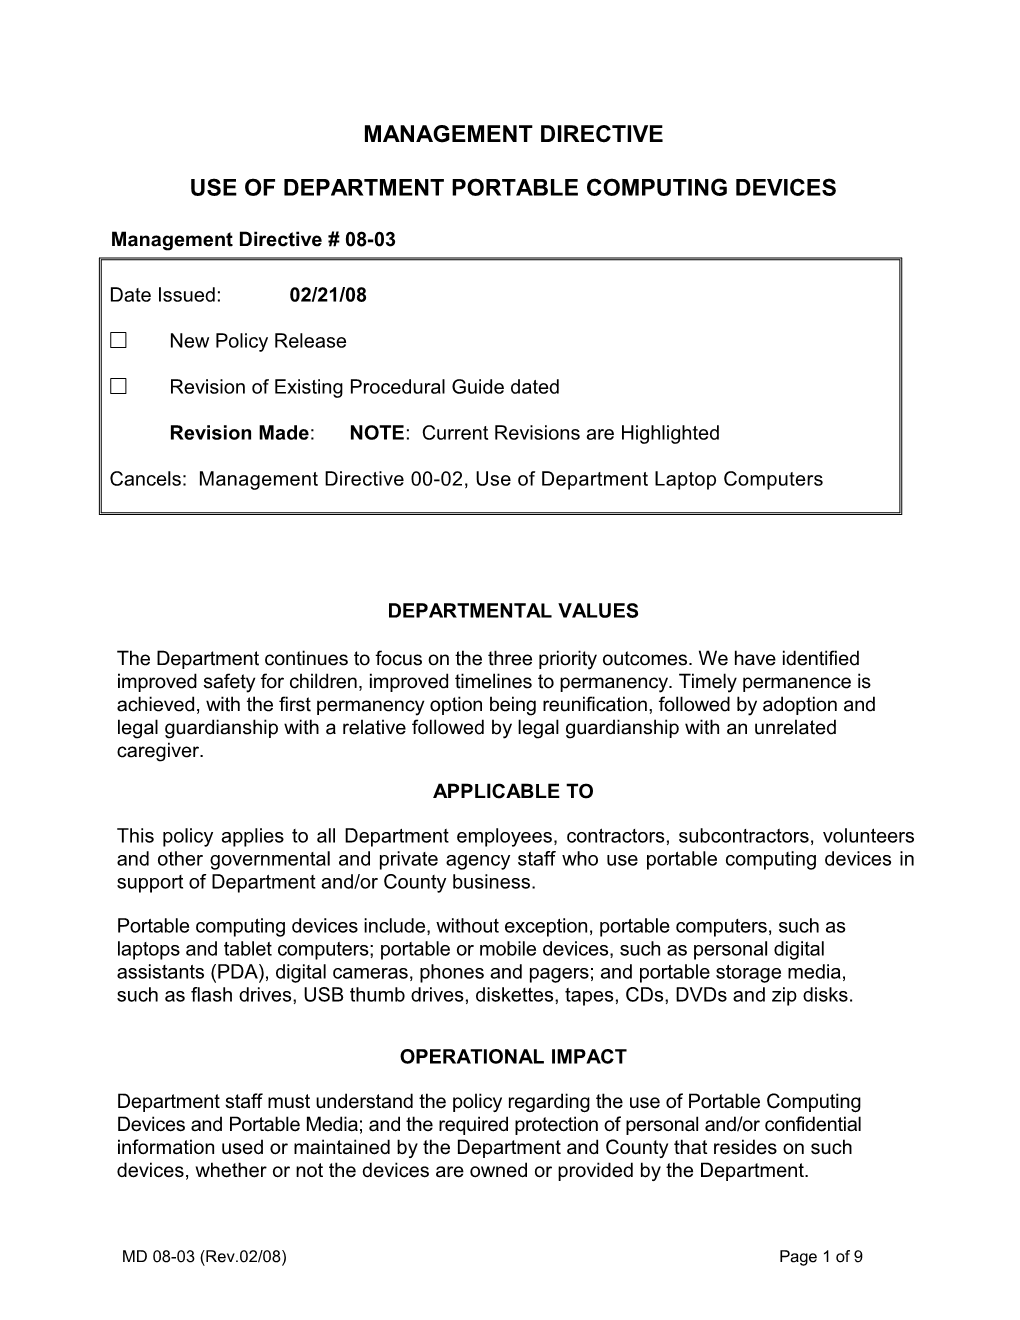 Management Directive Use of Department Portable Computing Devices